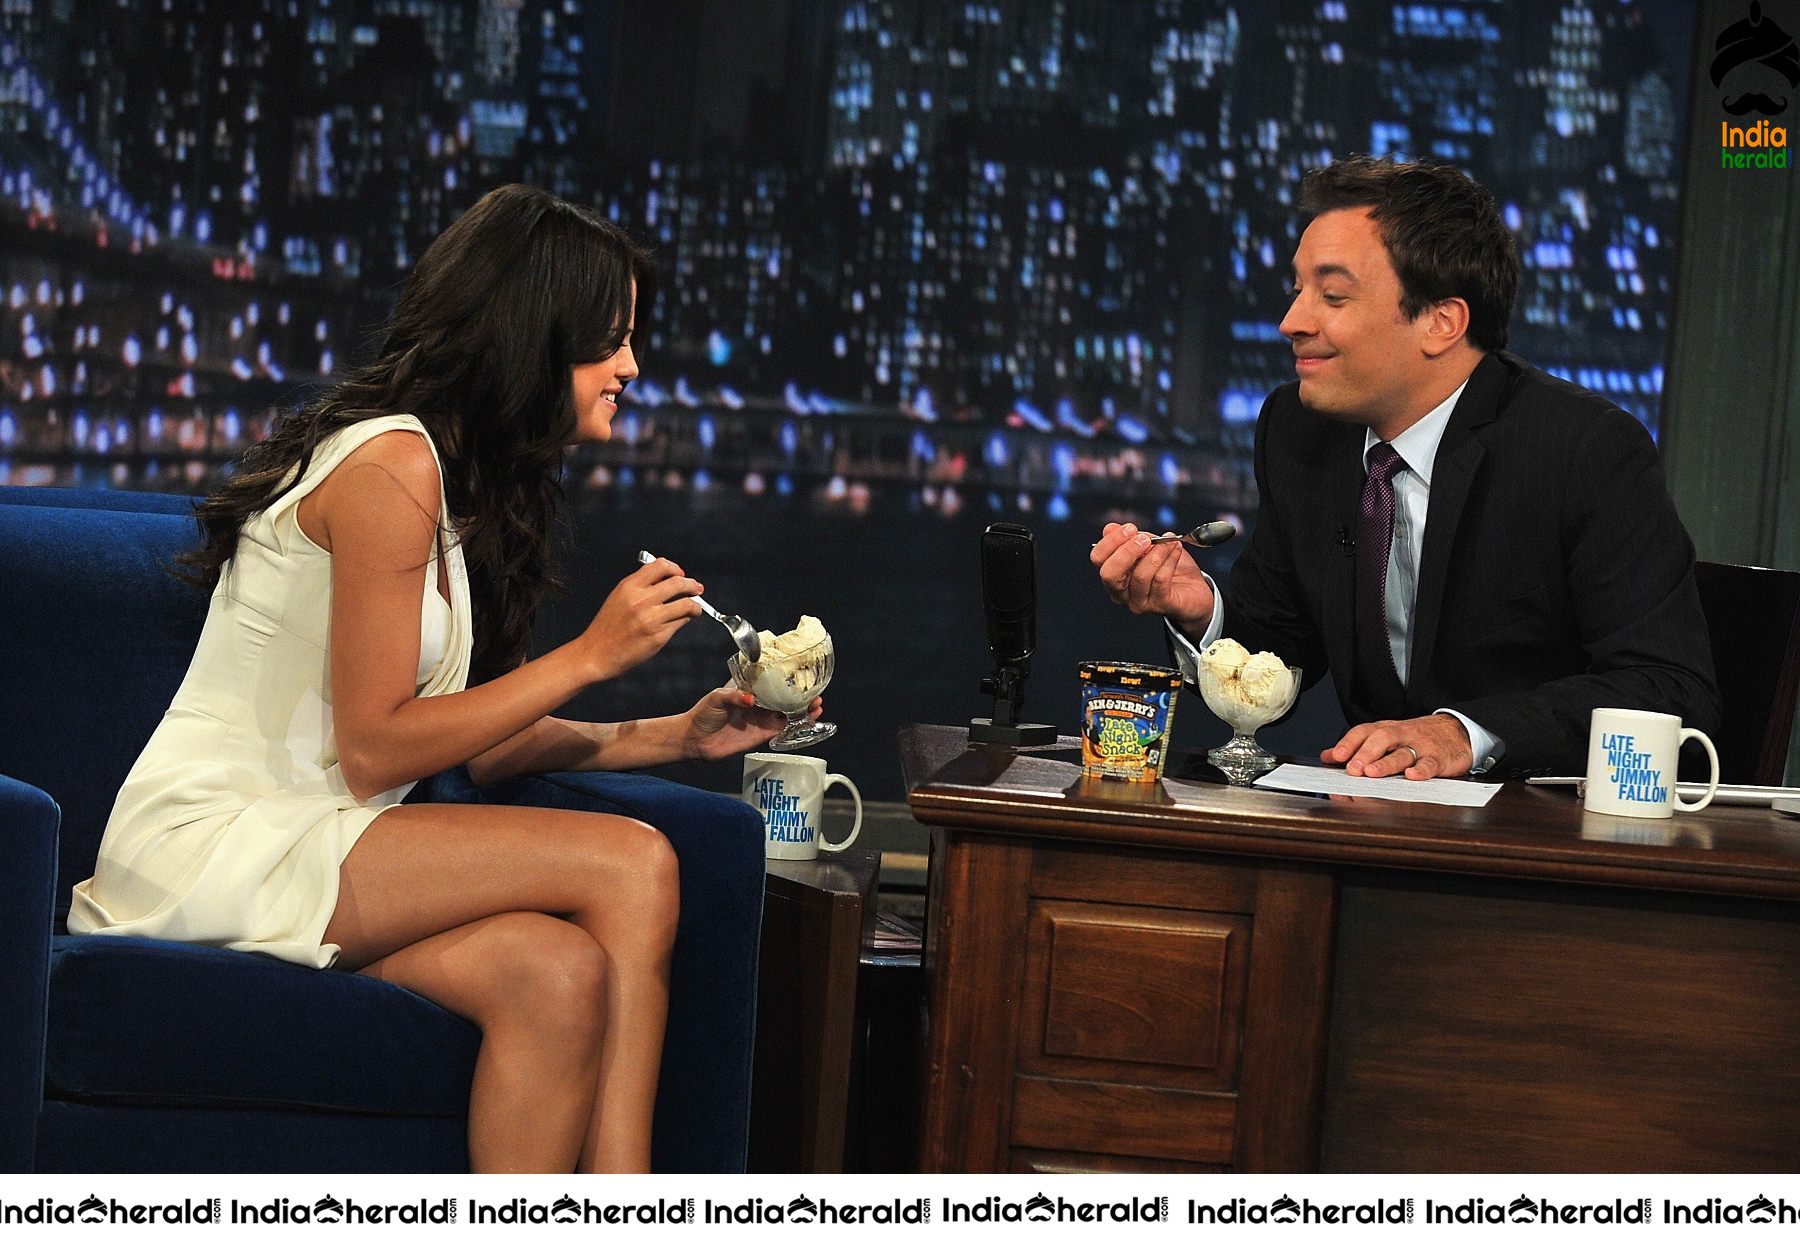 Selena Gomez at Late Night Show with Jimmy Falon